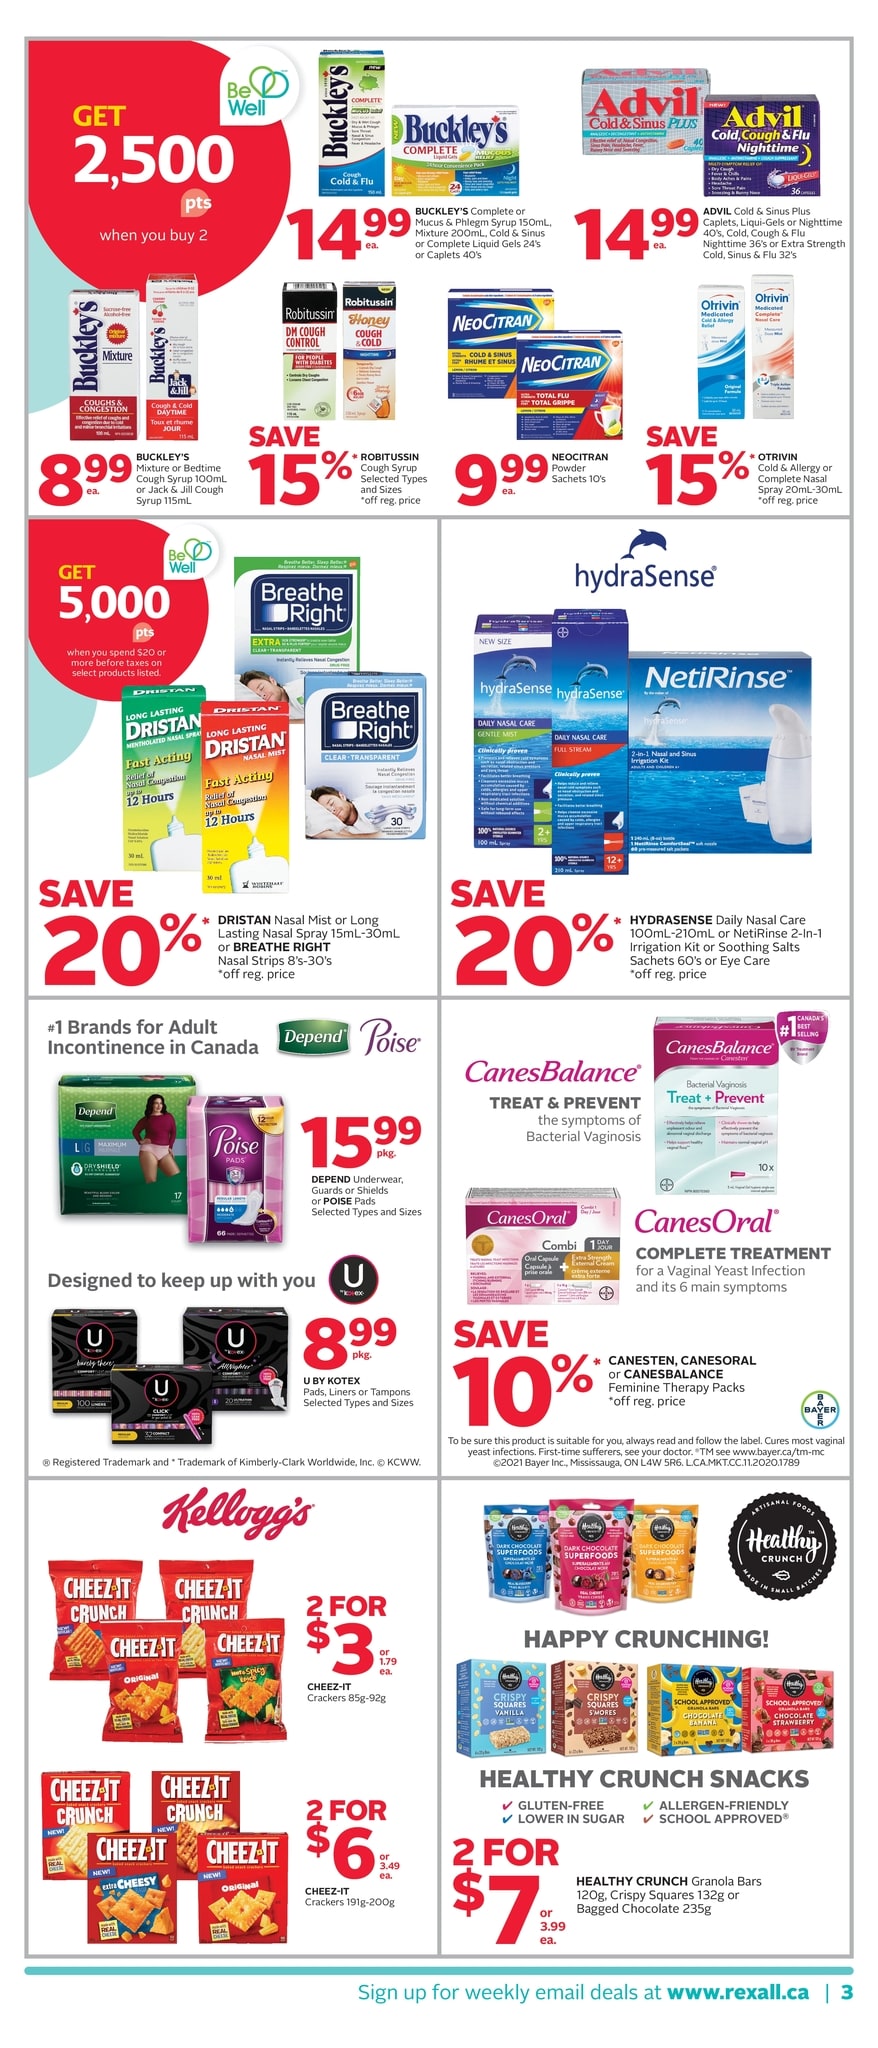 Rexall - Weekly Flyer Specials - Page 4